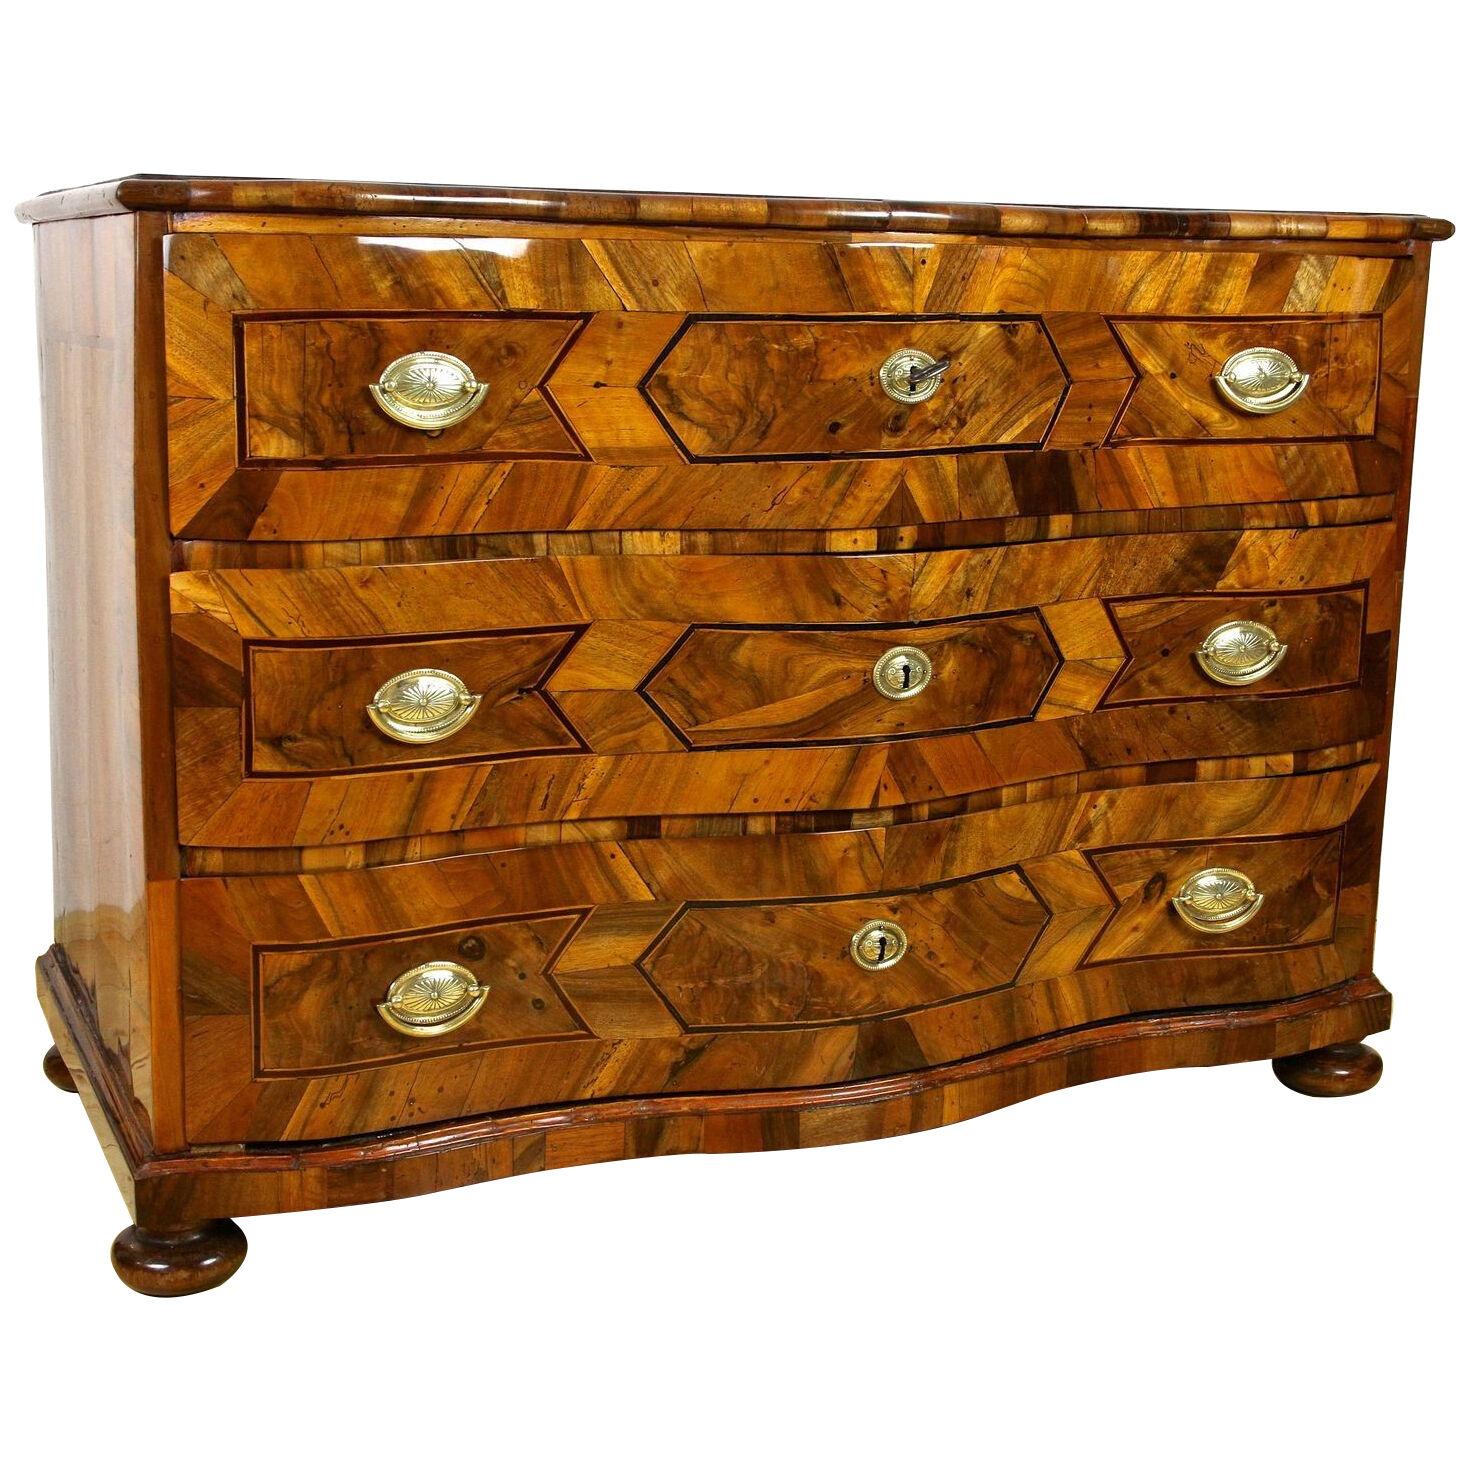 18th Century Baroque Chest Of Drawers With Marquetry Works, Austria ca. 1770